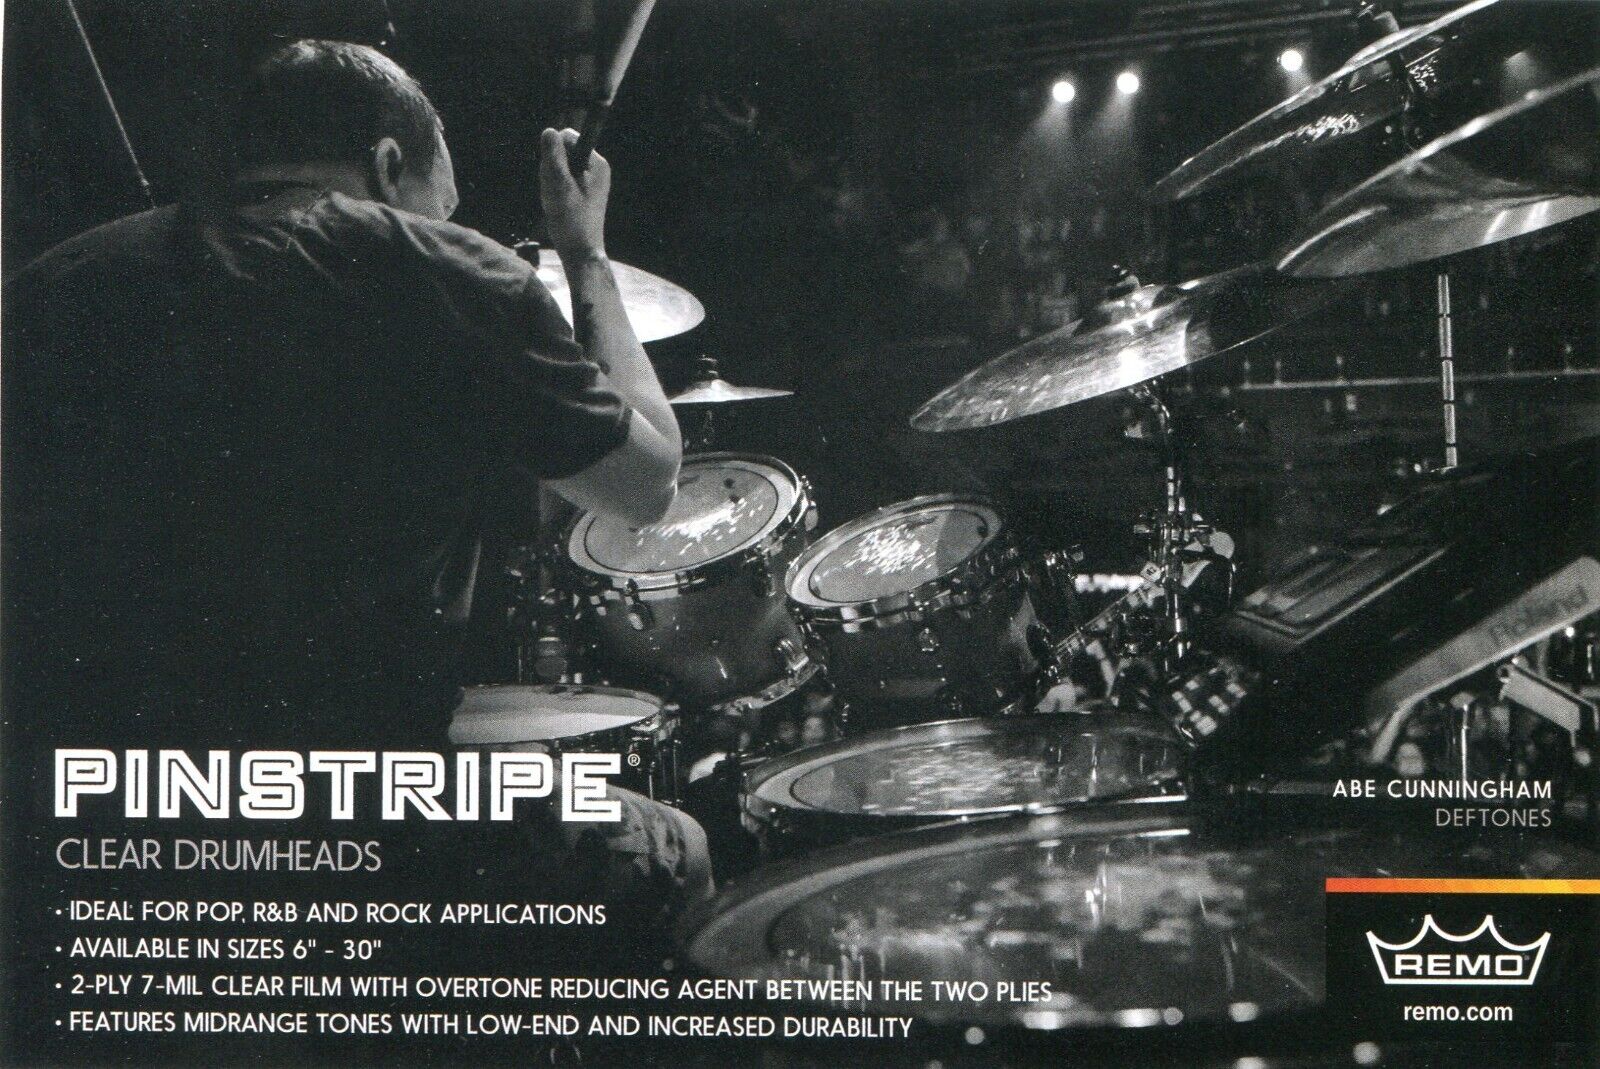 2016 small Print Ad of Remo Pinstripe Clear Drumheads w Abe Cunningham Deftones